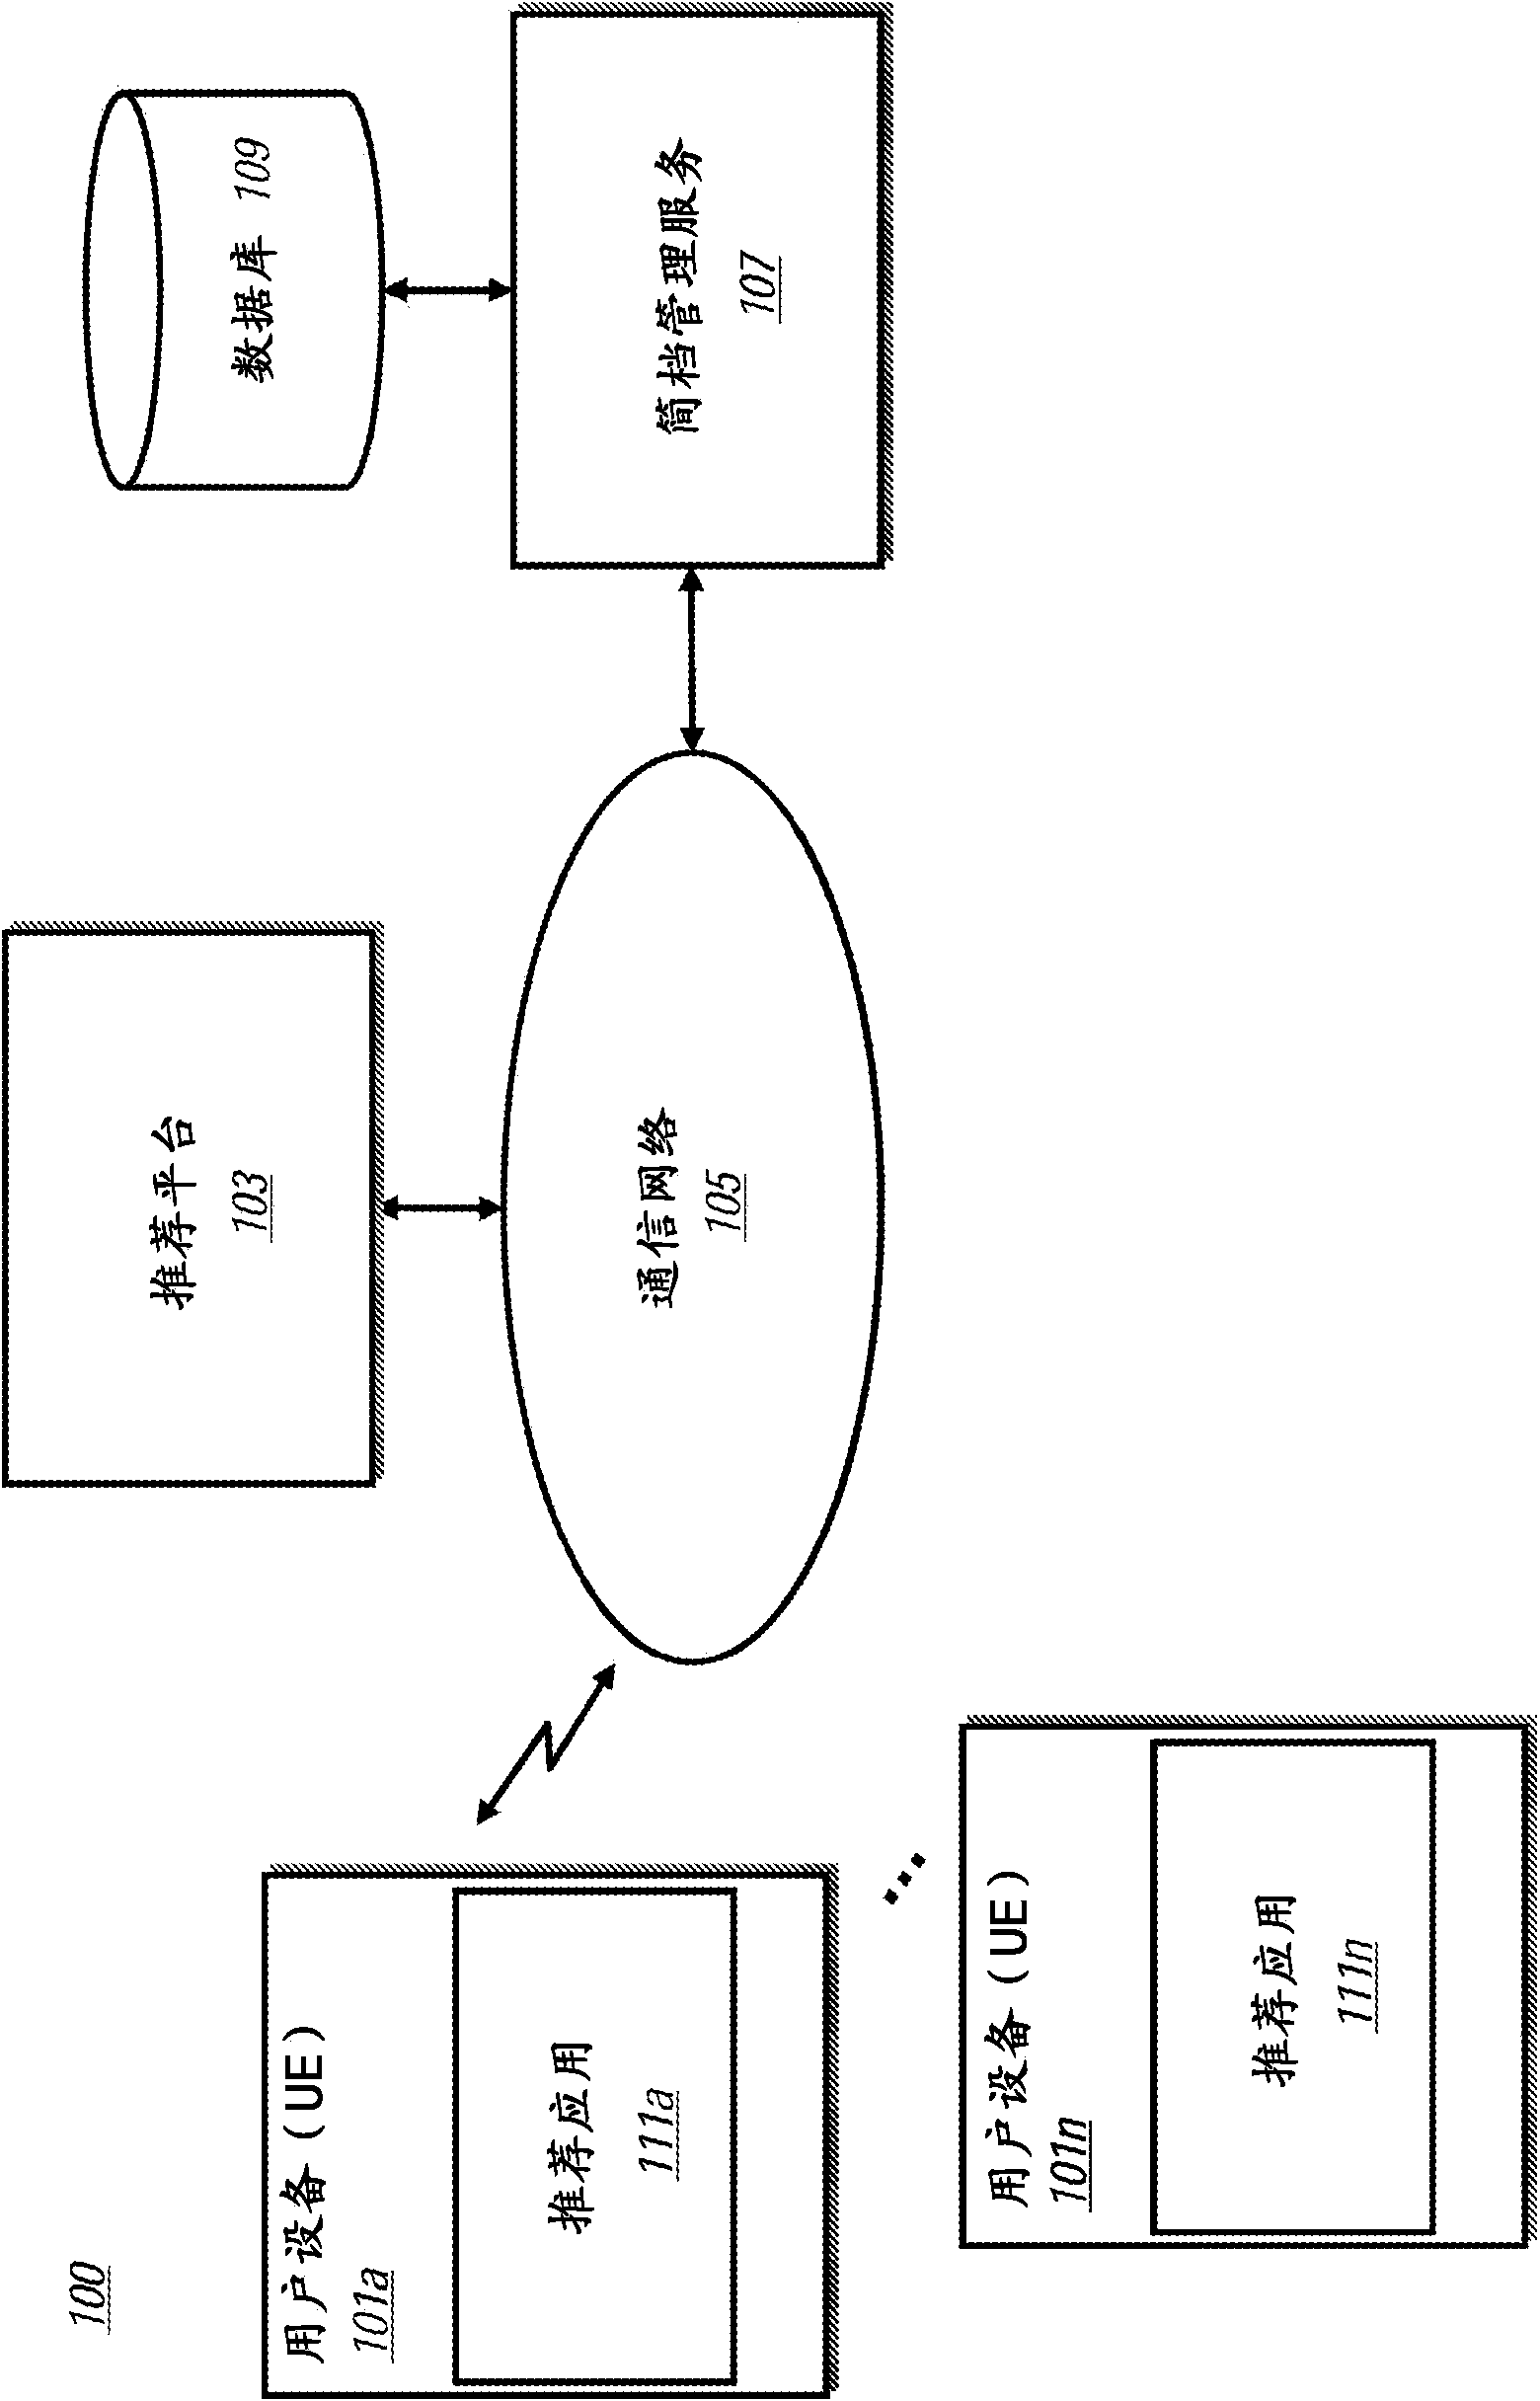 Method and apparatus for collaborative filtering for real-time recommendation